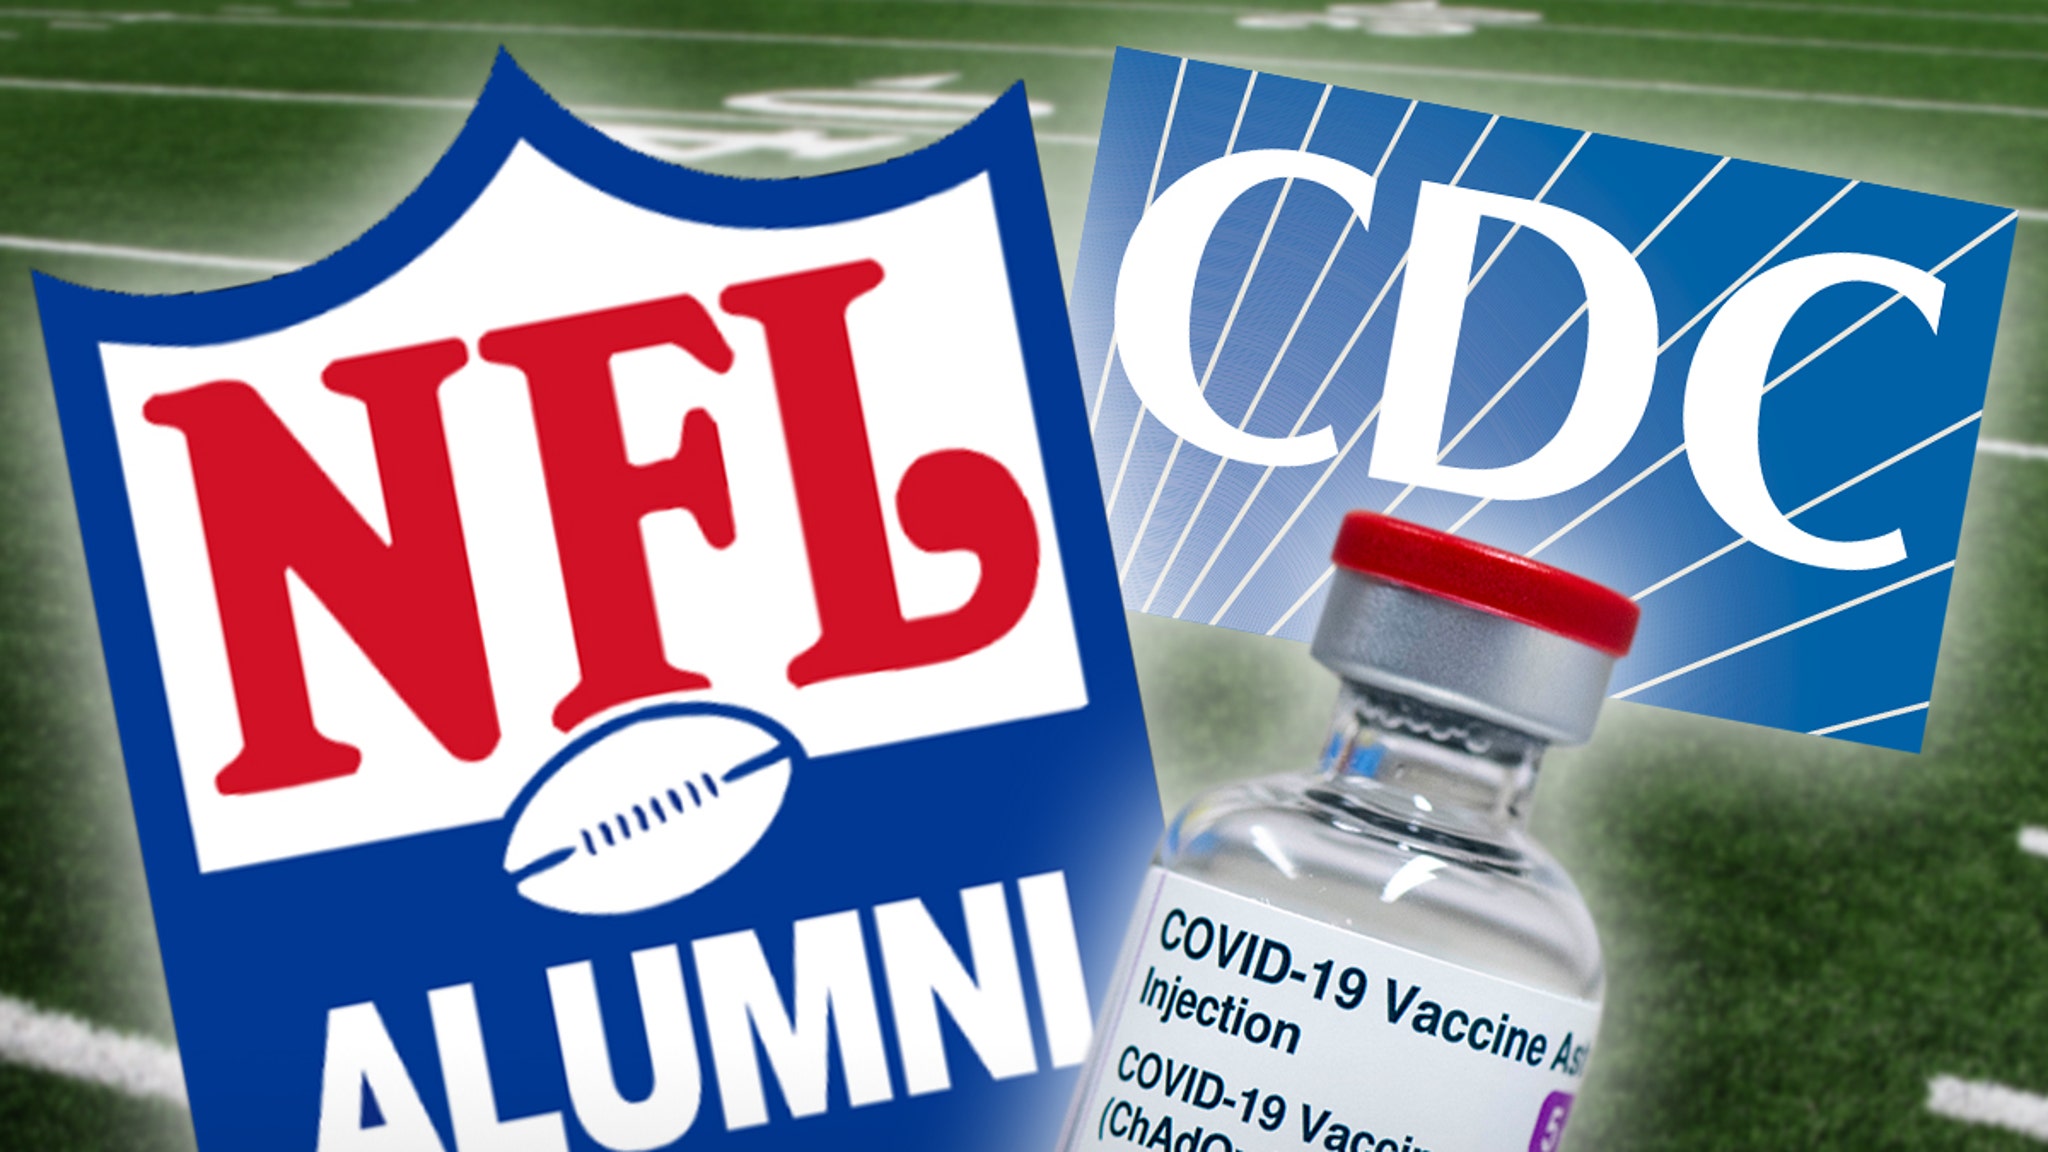 CDC Paid 'NFL Alumni' Assoc. $3.5 Mil To Promote Covid-19 Vaccine